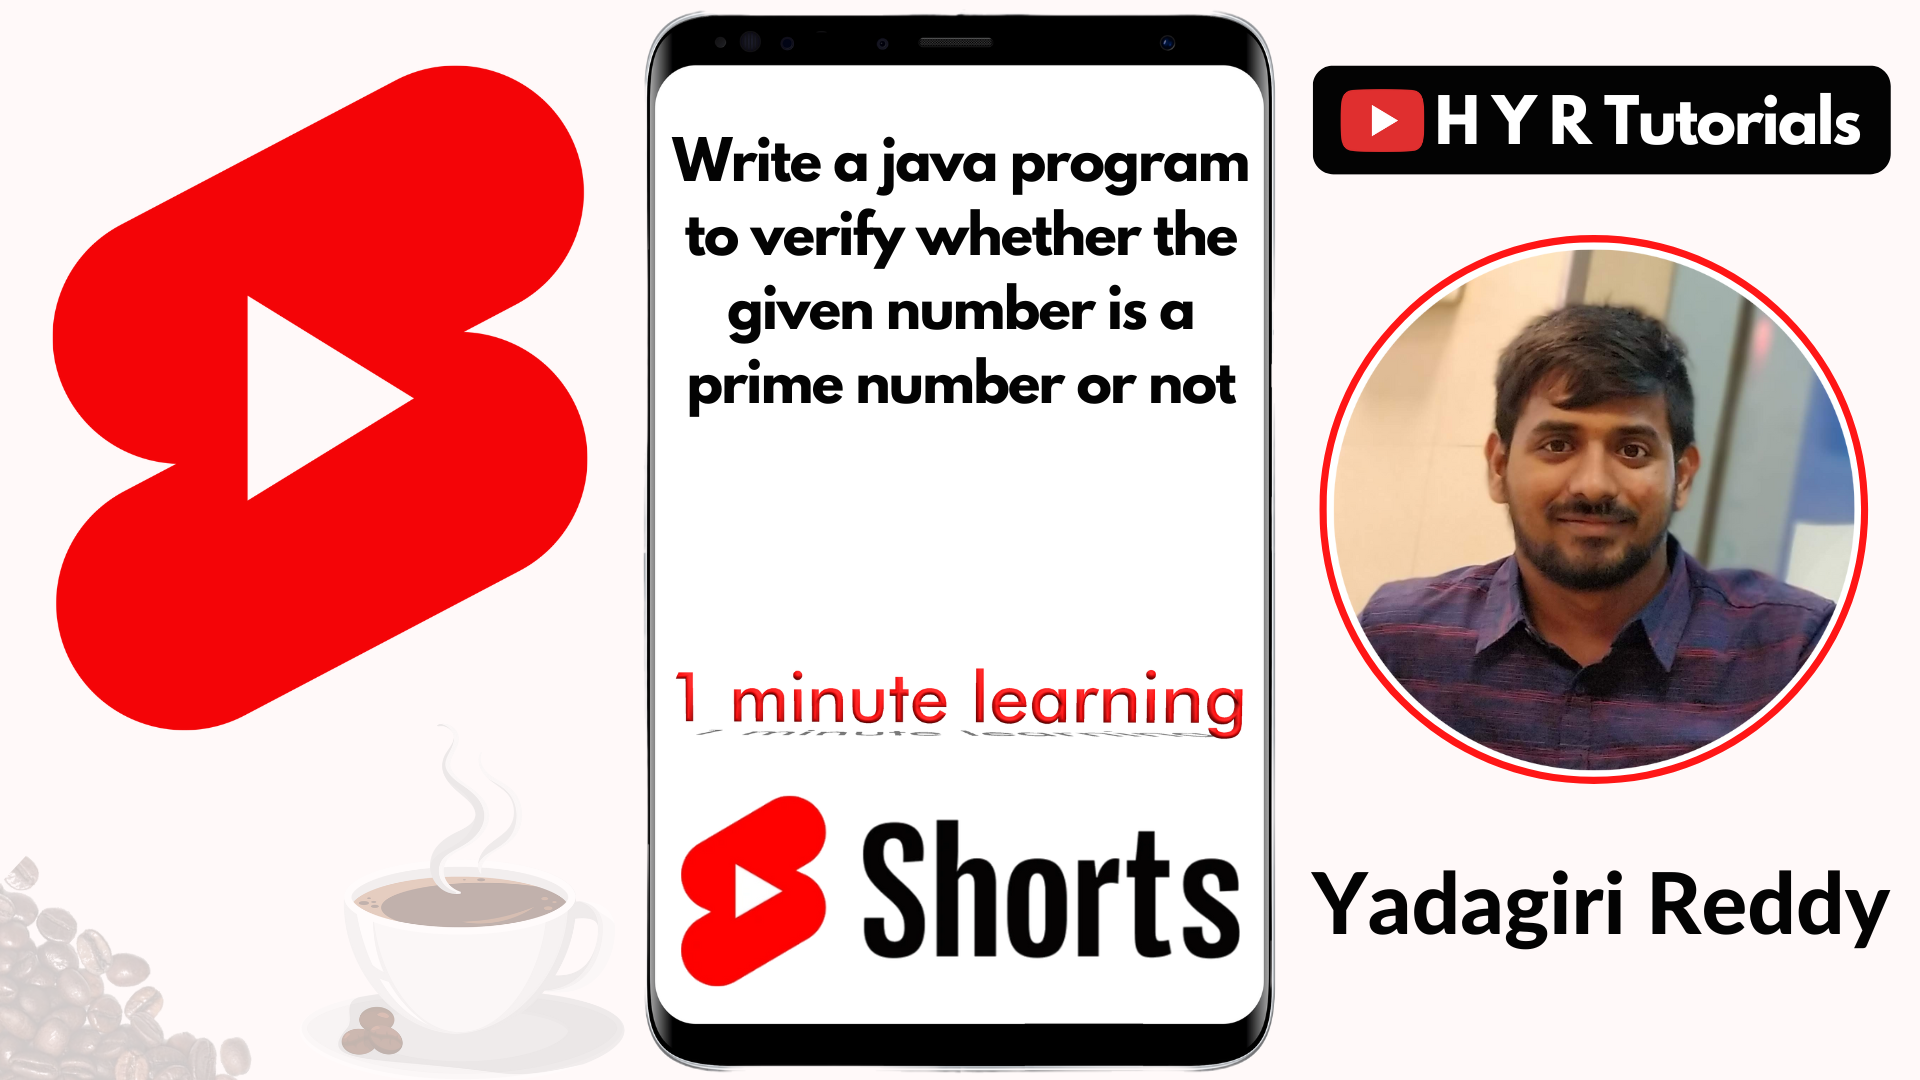 Write a java program to verify whether the given number is a prime number or not